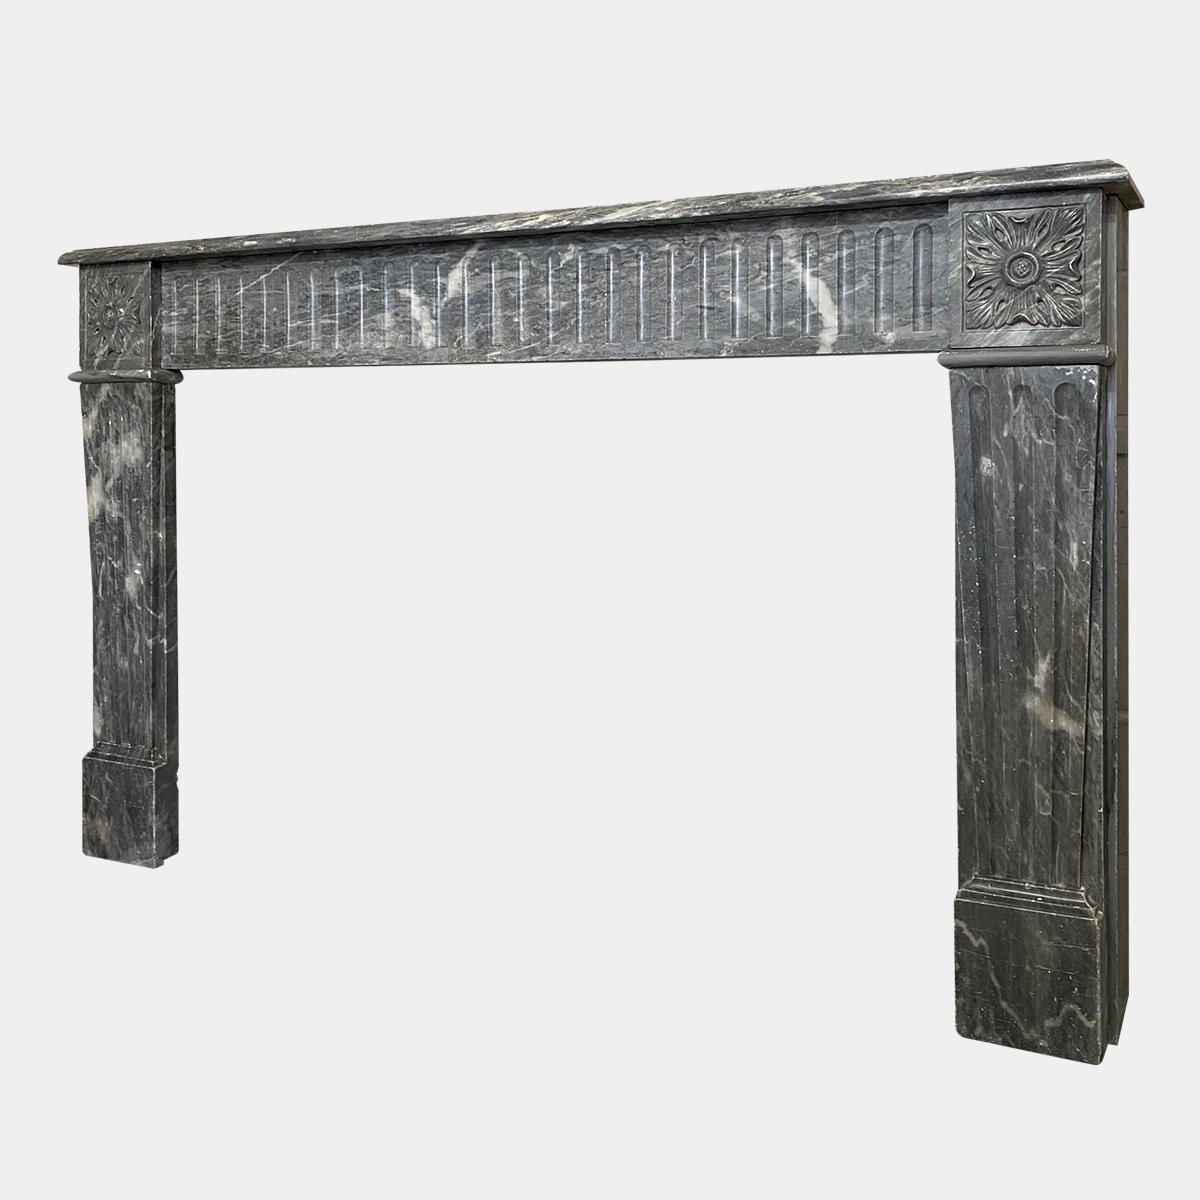 A very large and substantial Louis XVI period fire surround from the late 18th century. The wide fluted frieze with end blocks of large well carved square Patarae, supported by conforming and tapering fluted front panels. All beneath a wide a